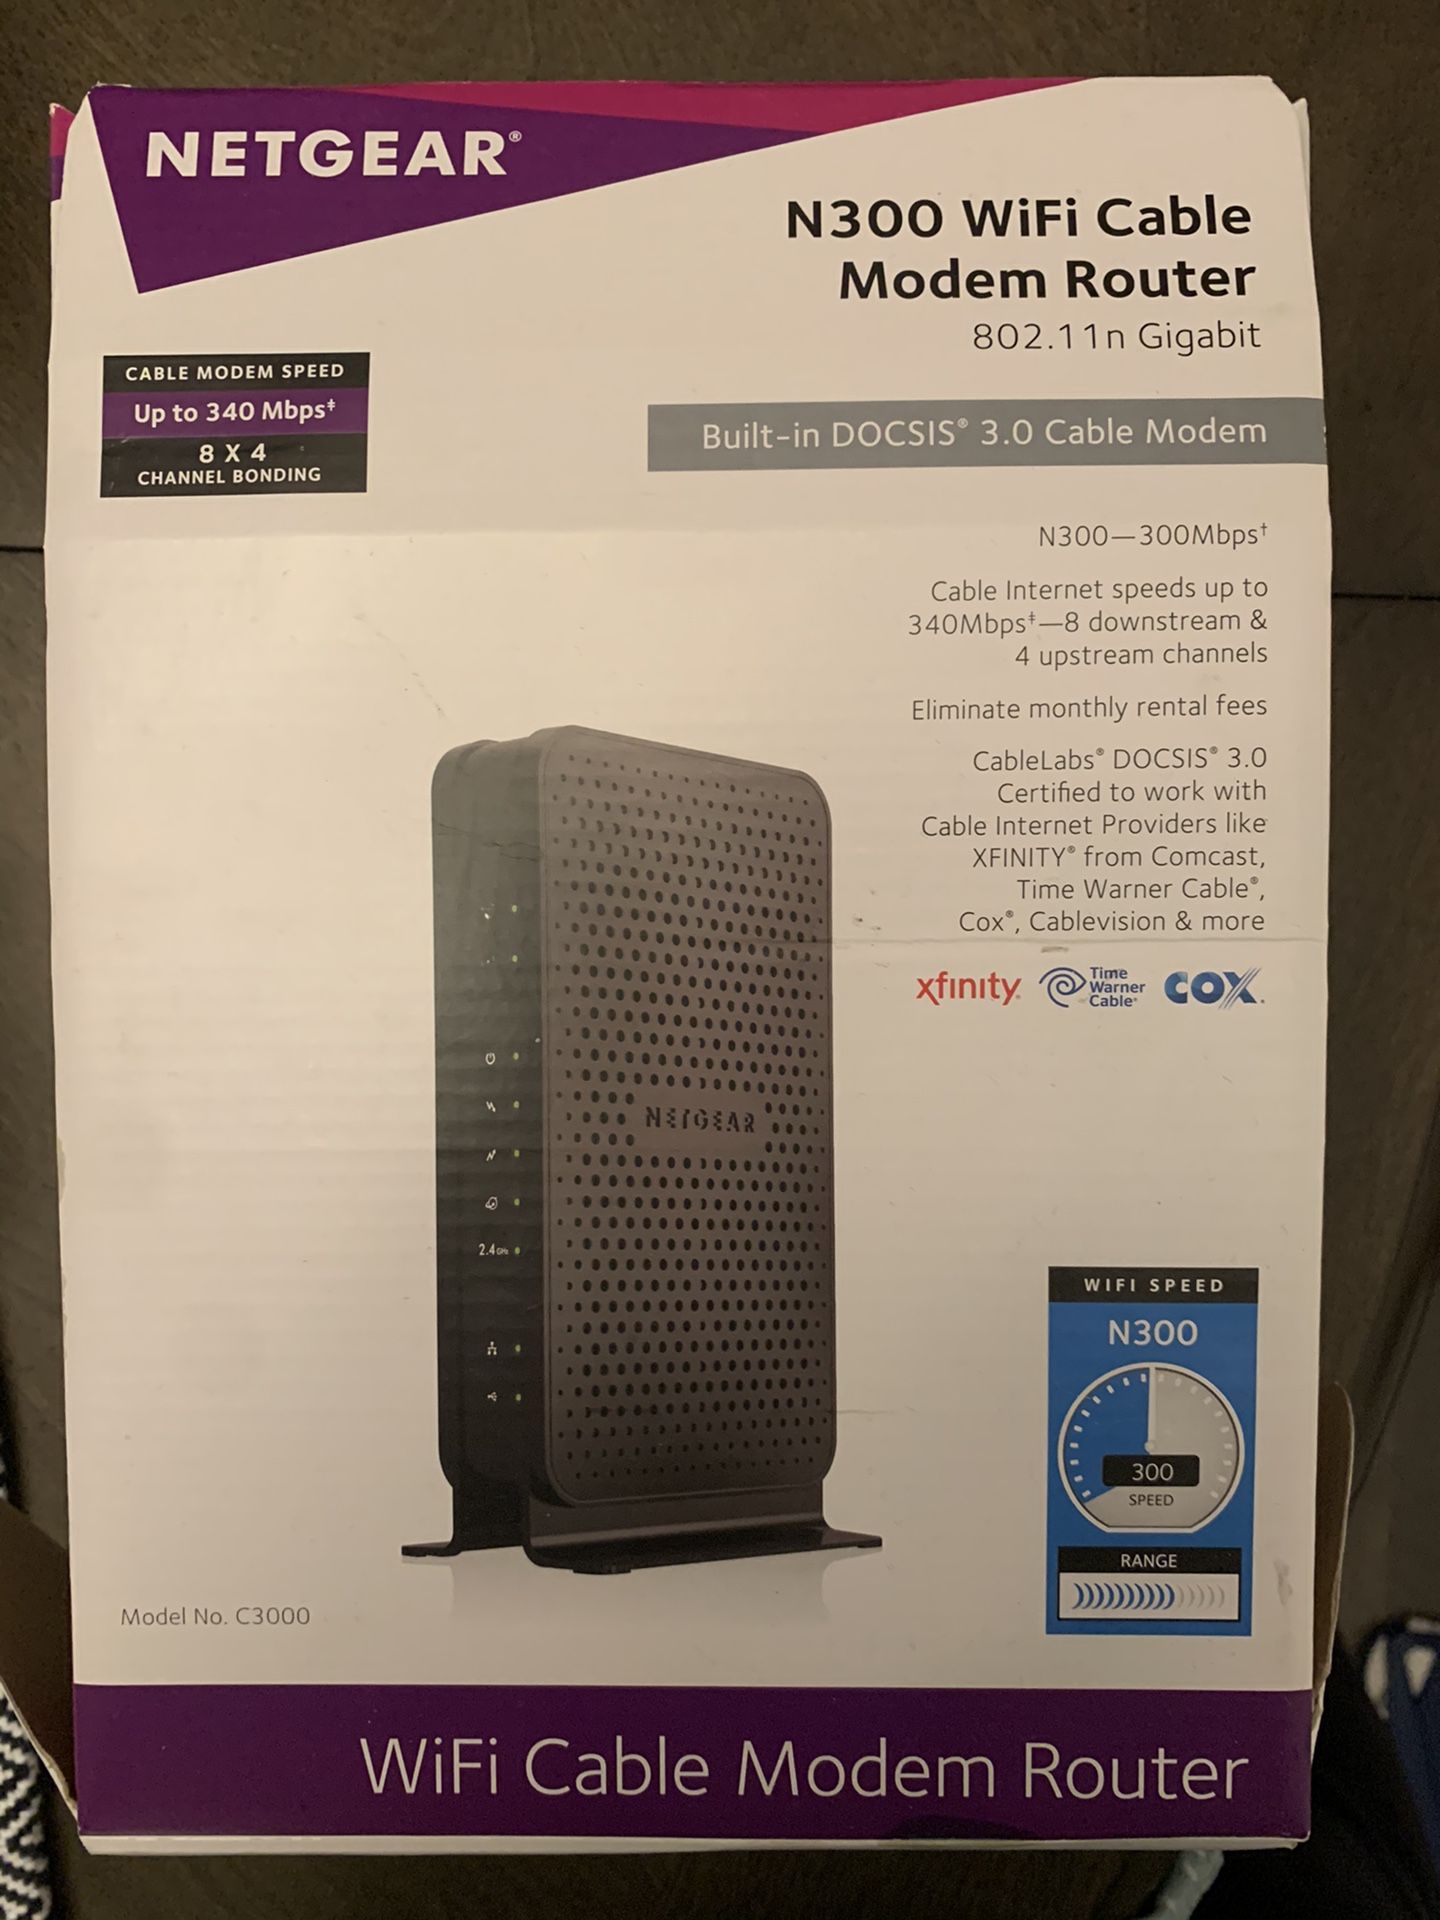 N300 WiFi Cable Modem Router